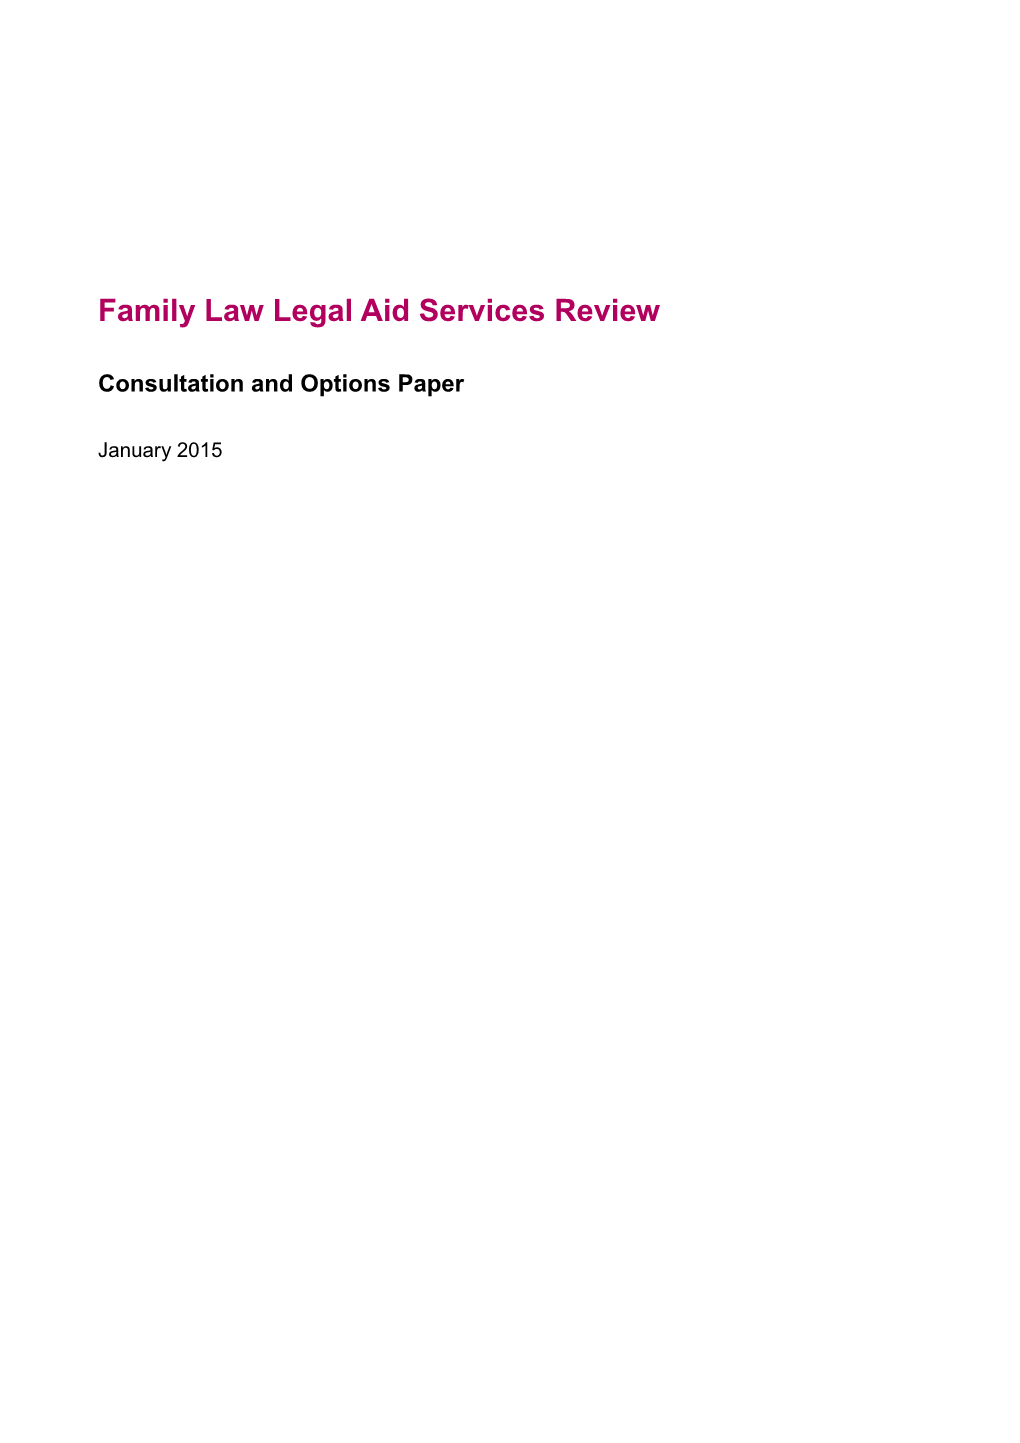 Family Law Legal Aid Services Review Consultation and Options Paper